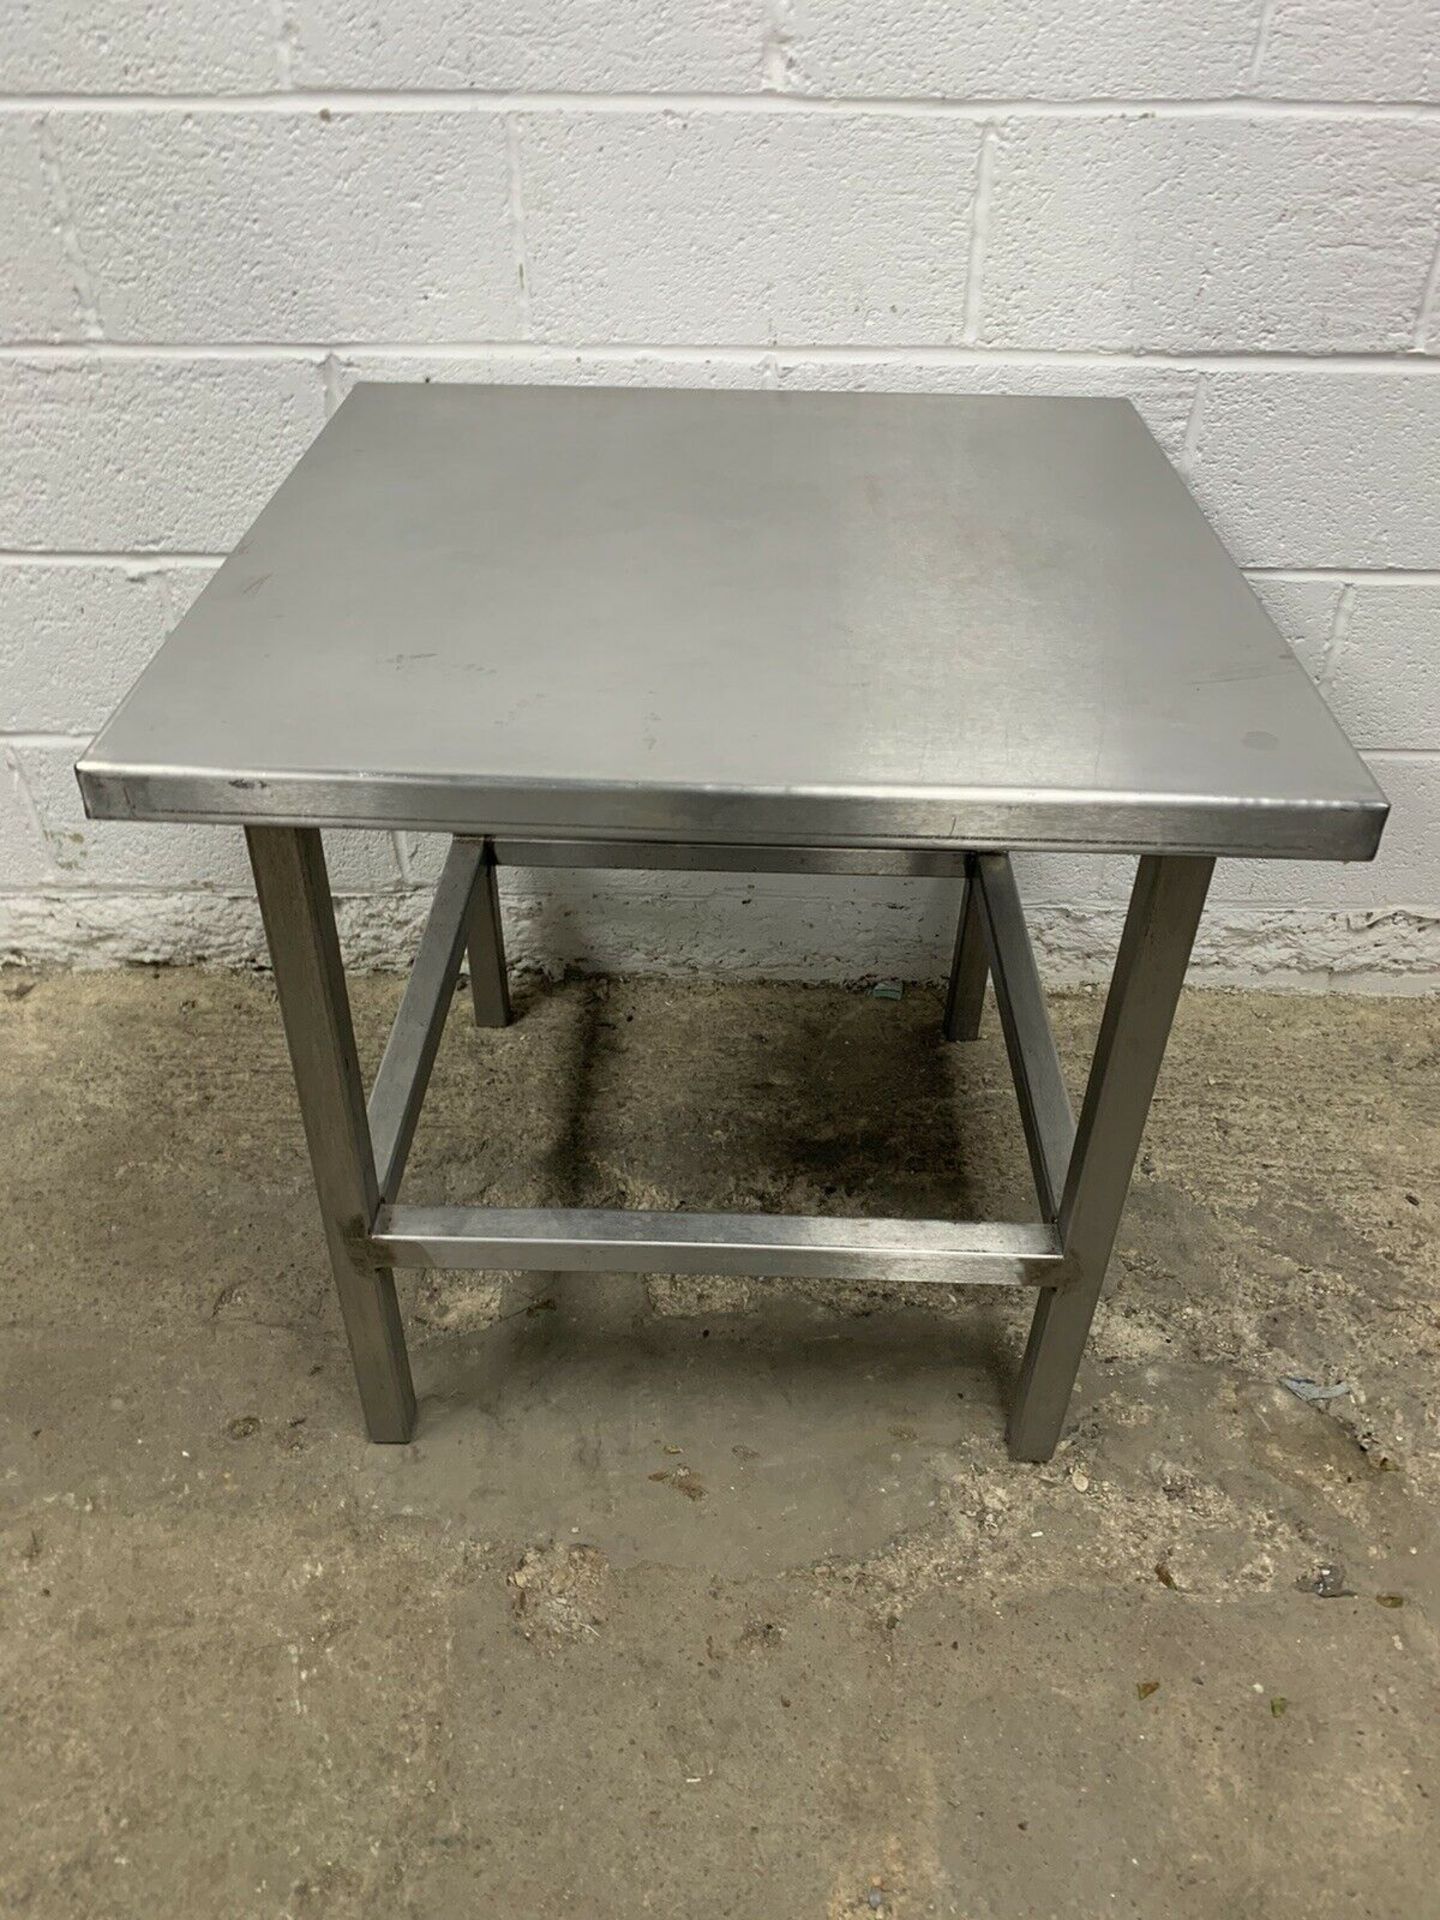 Stainless Steel Preperation Unit